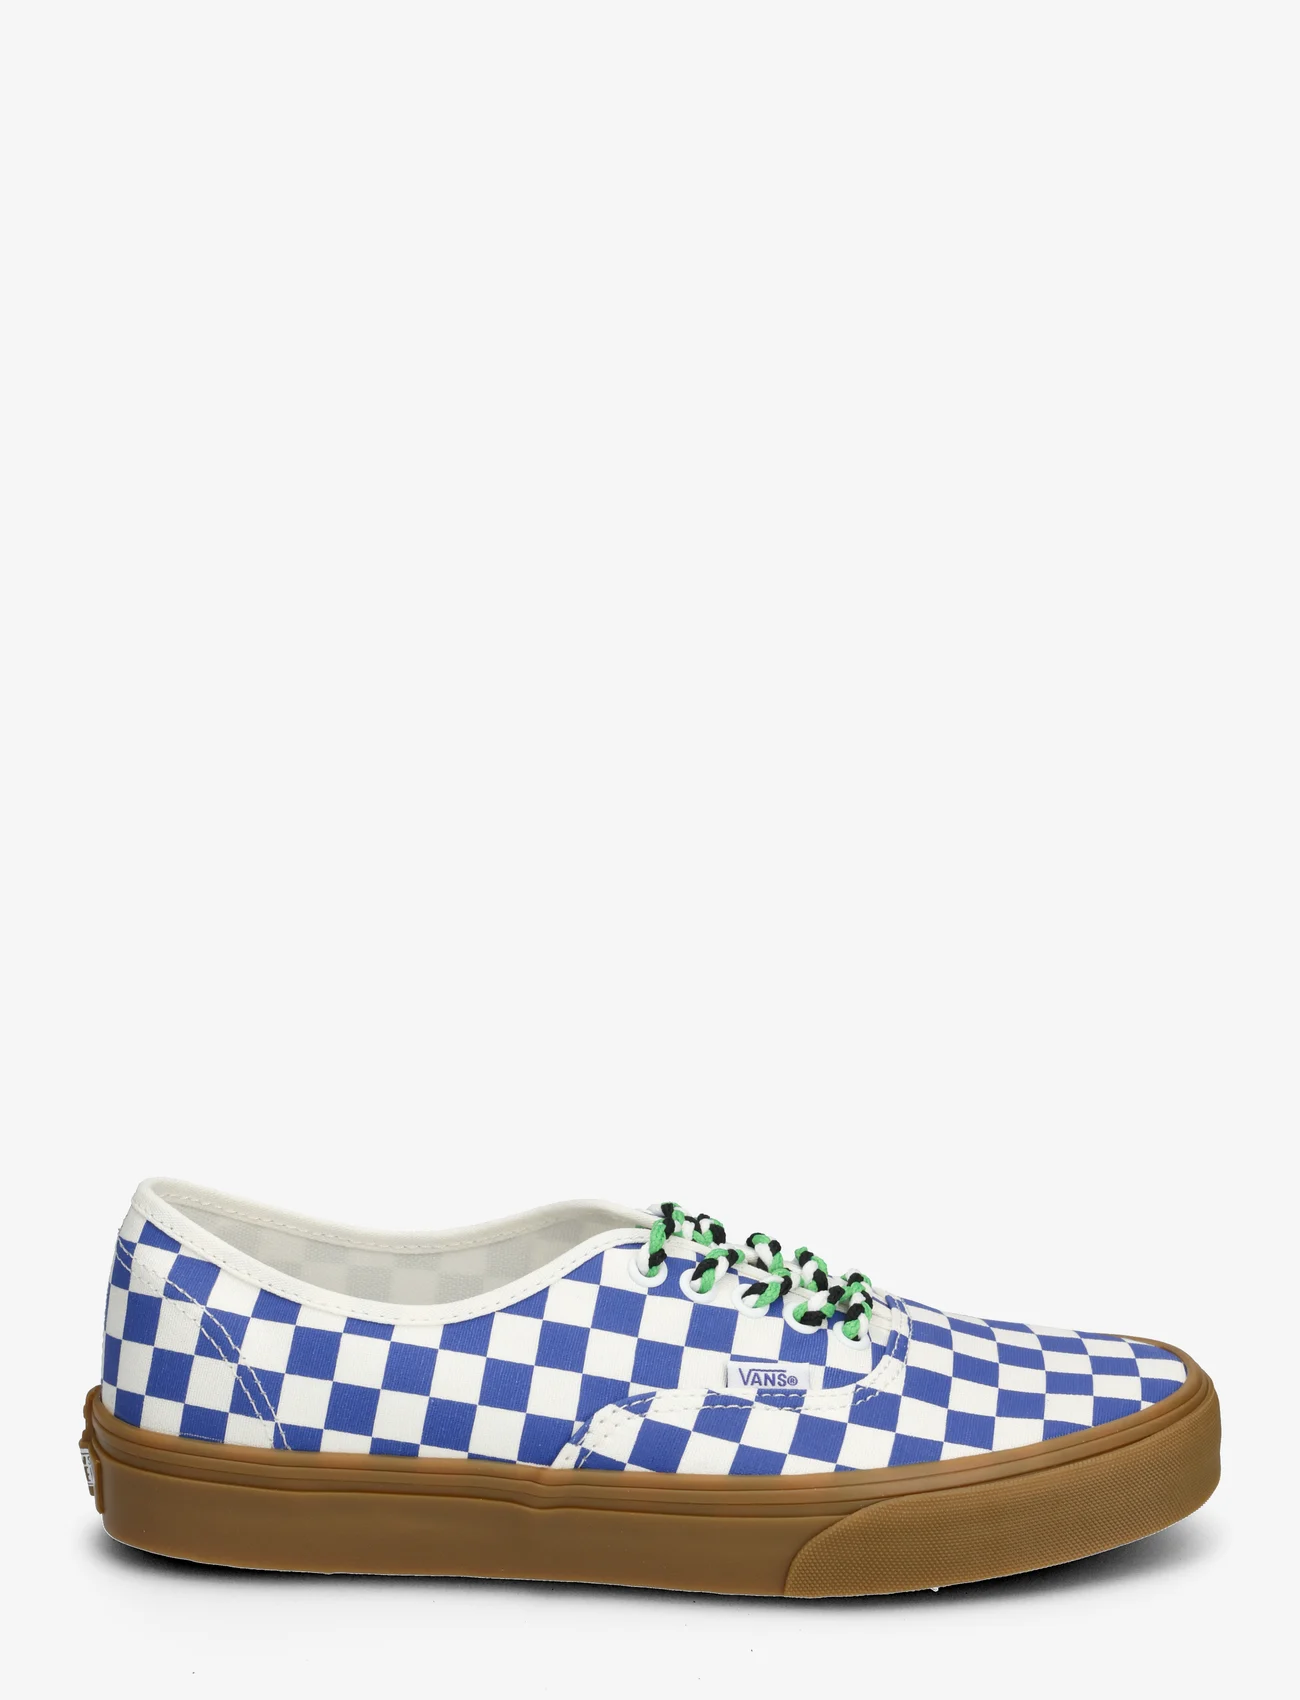 VANS - Authentic - lave sneakers - checkerboard blue/white - 1